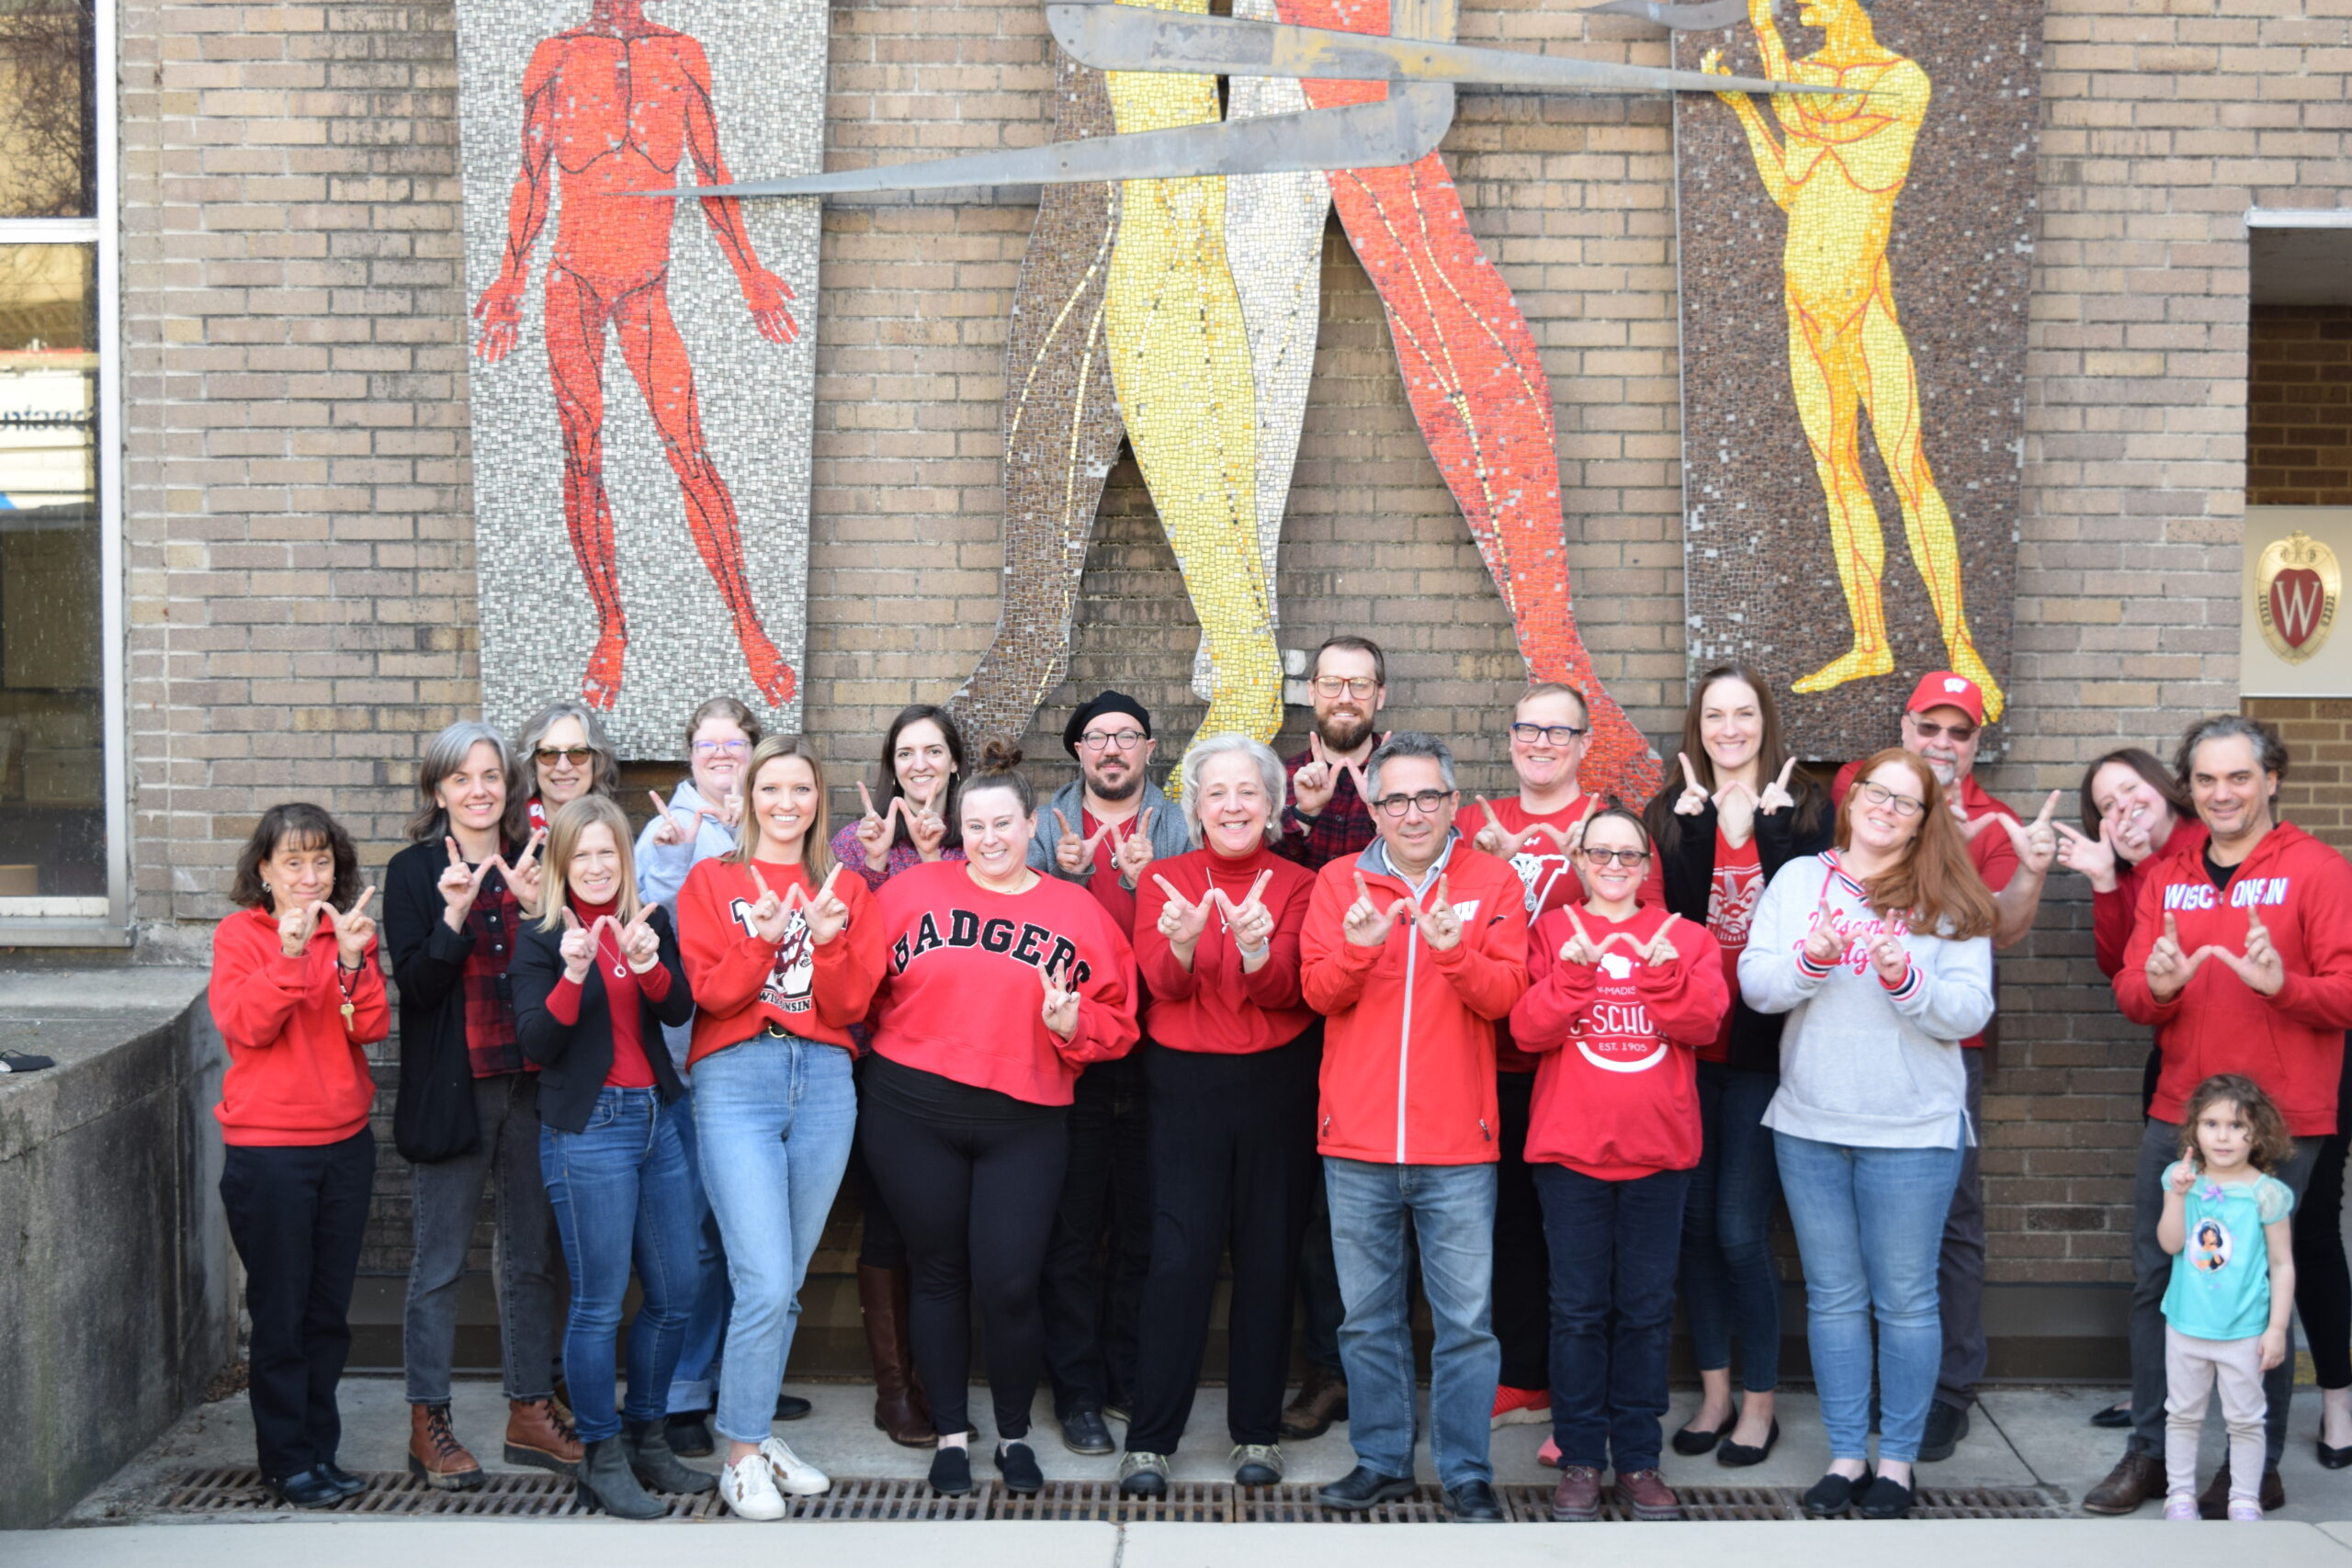 J-School faculty and staff celebrate Day of the Badger 2023. Proceeds go to the Annual Fund, which provides discretionary funding for things like student scholarships, facilities upgrades and DE&I initiatives.